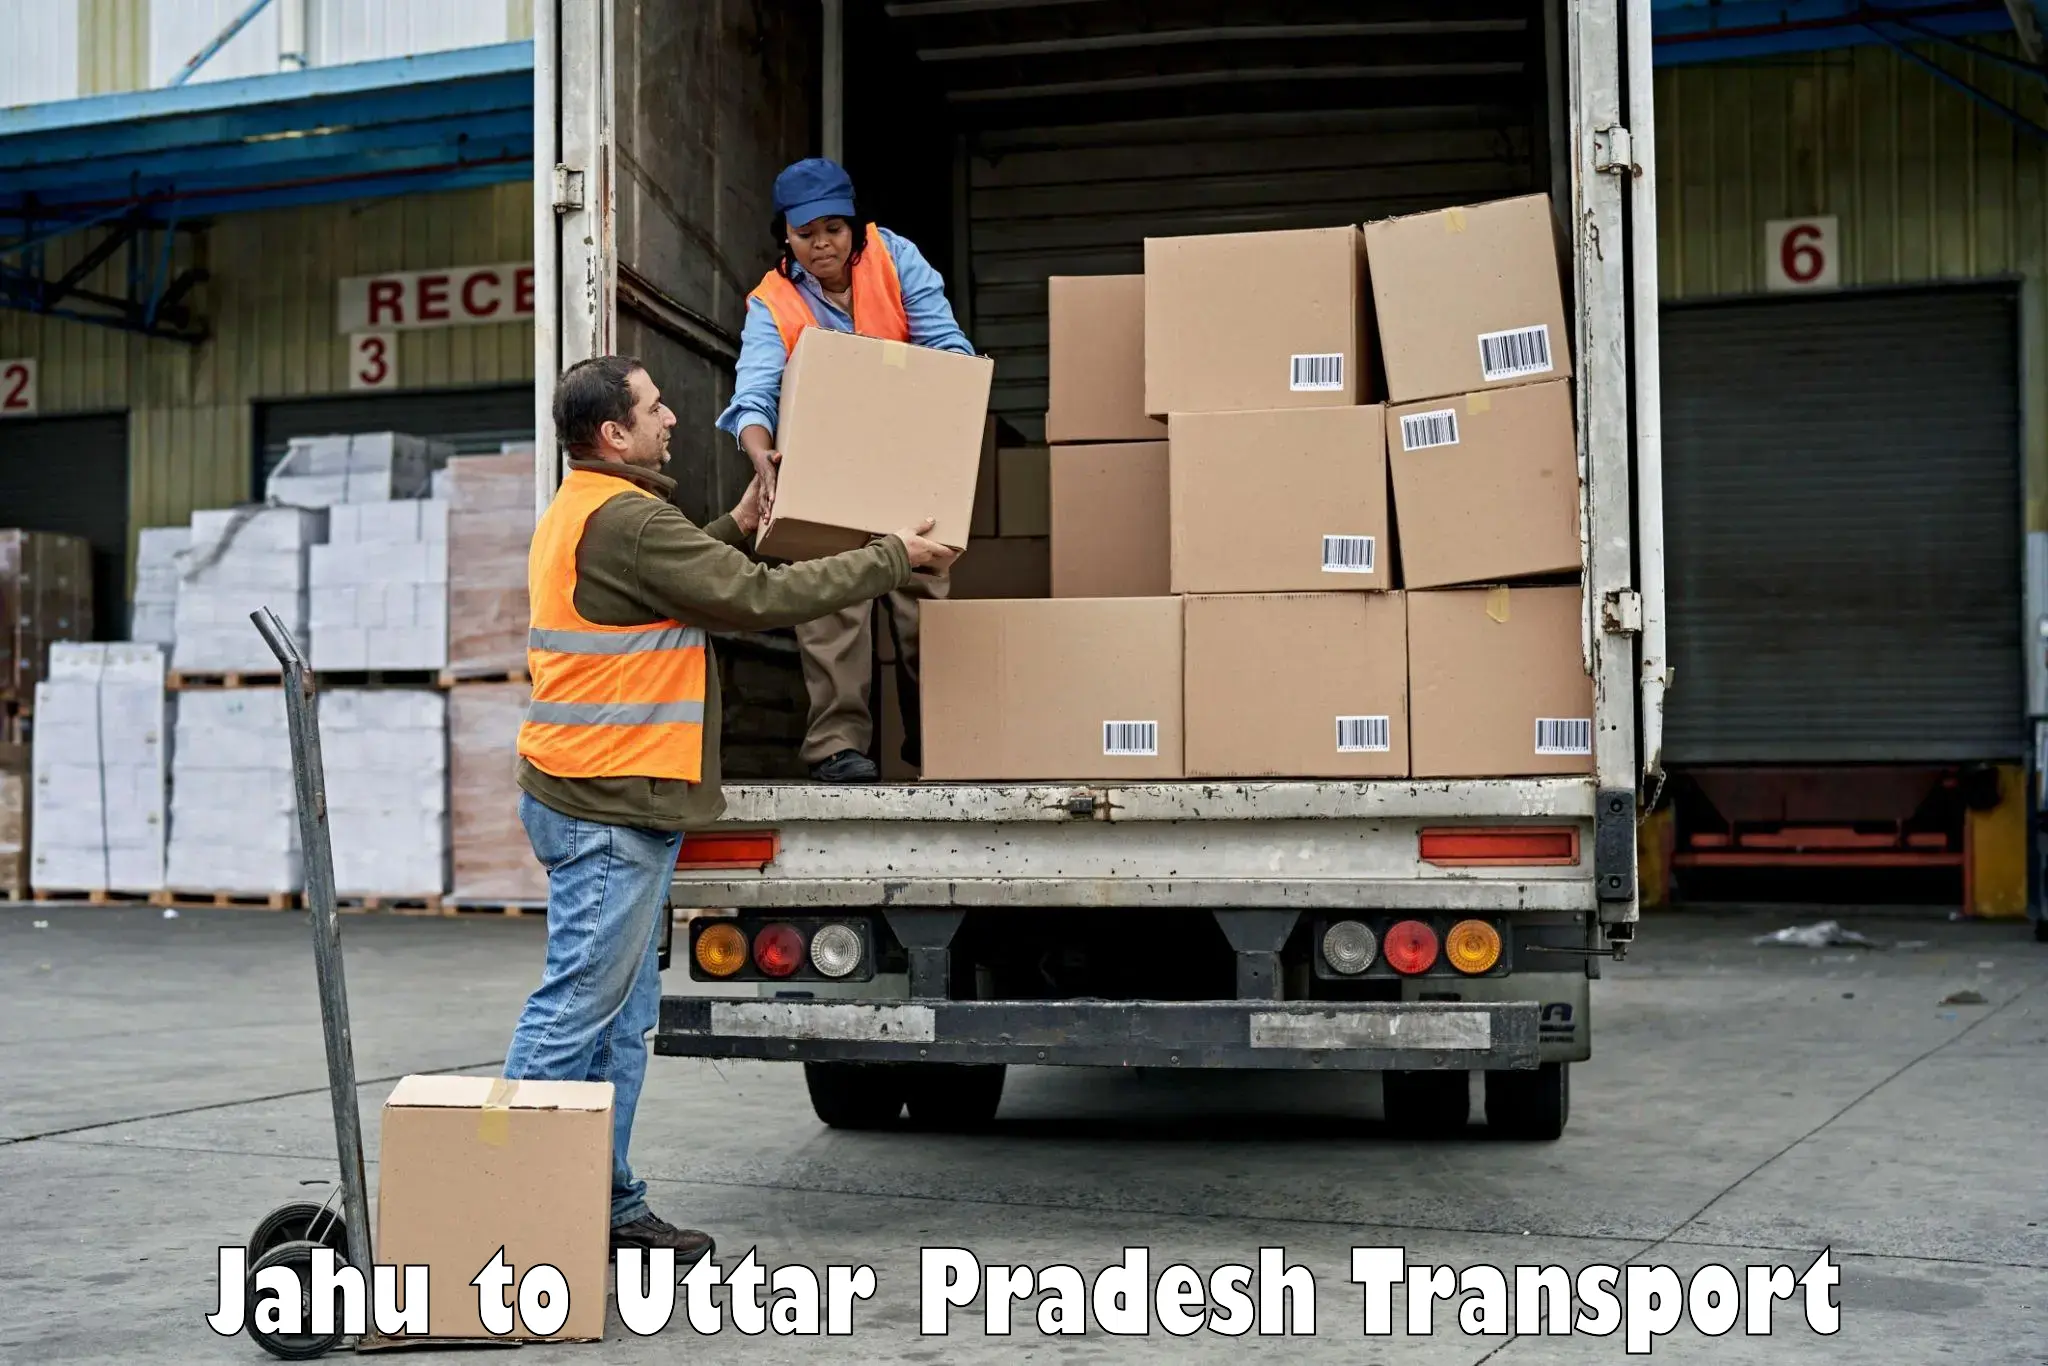 Nationwide transport services Jahu to Unchahar